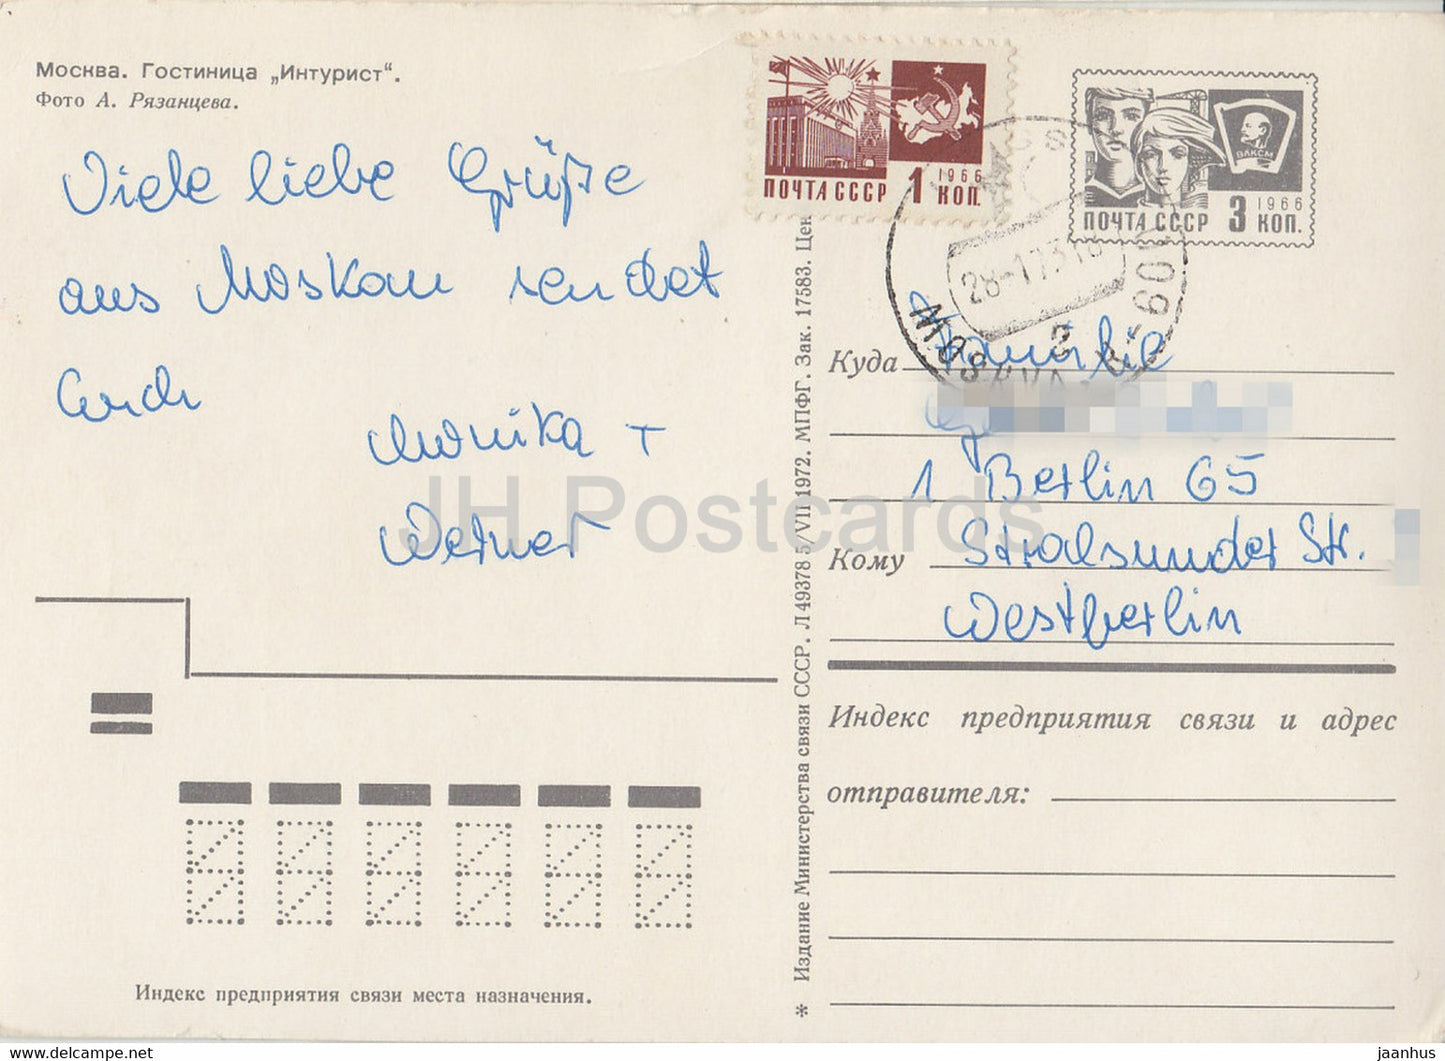 Moscow - hotel Intourist - car Volga - postal stationery - 1972 - Russia USSR - used